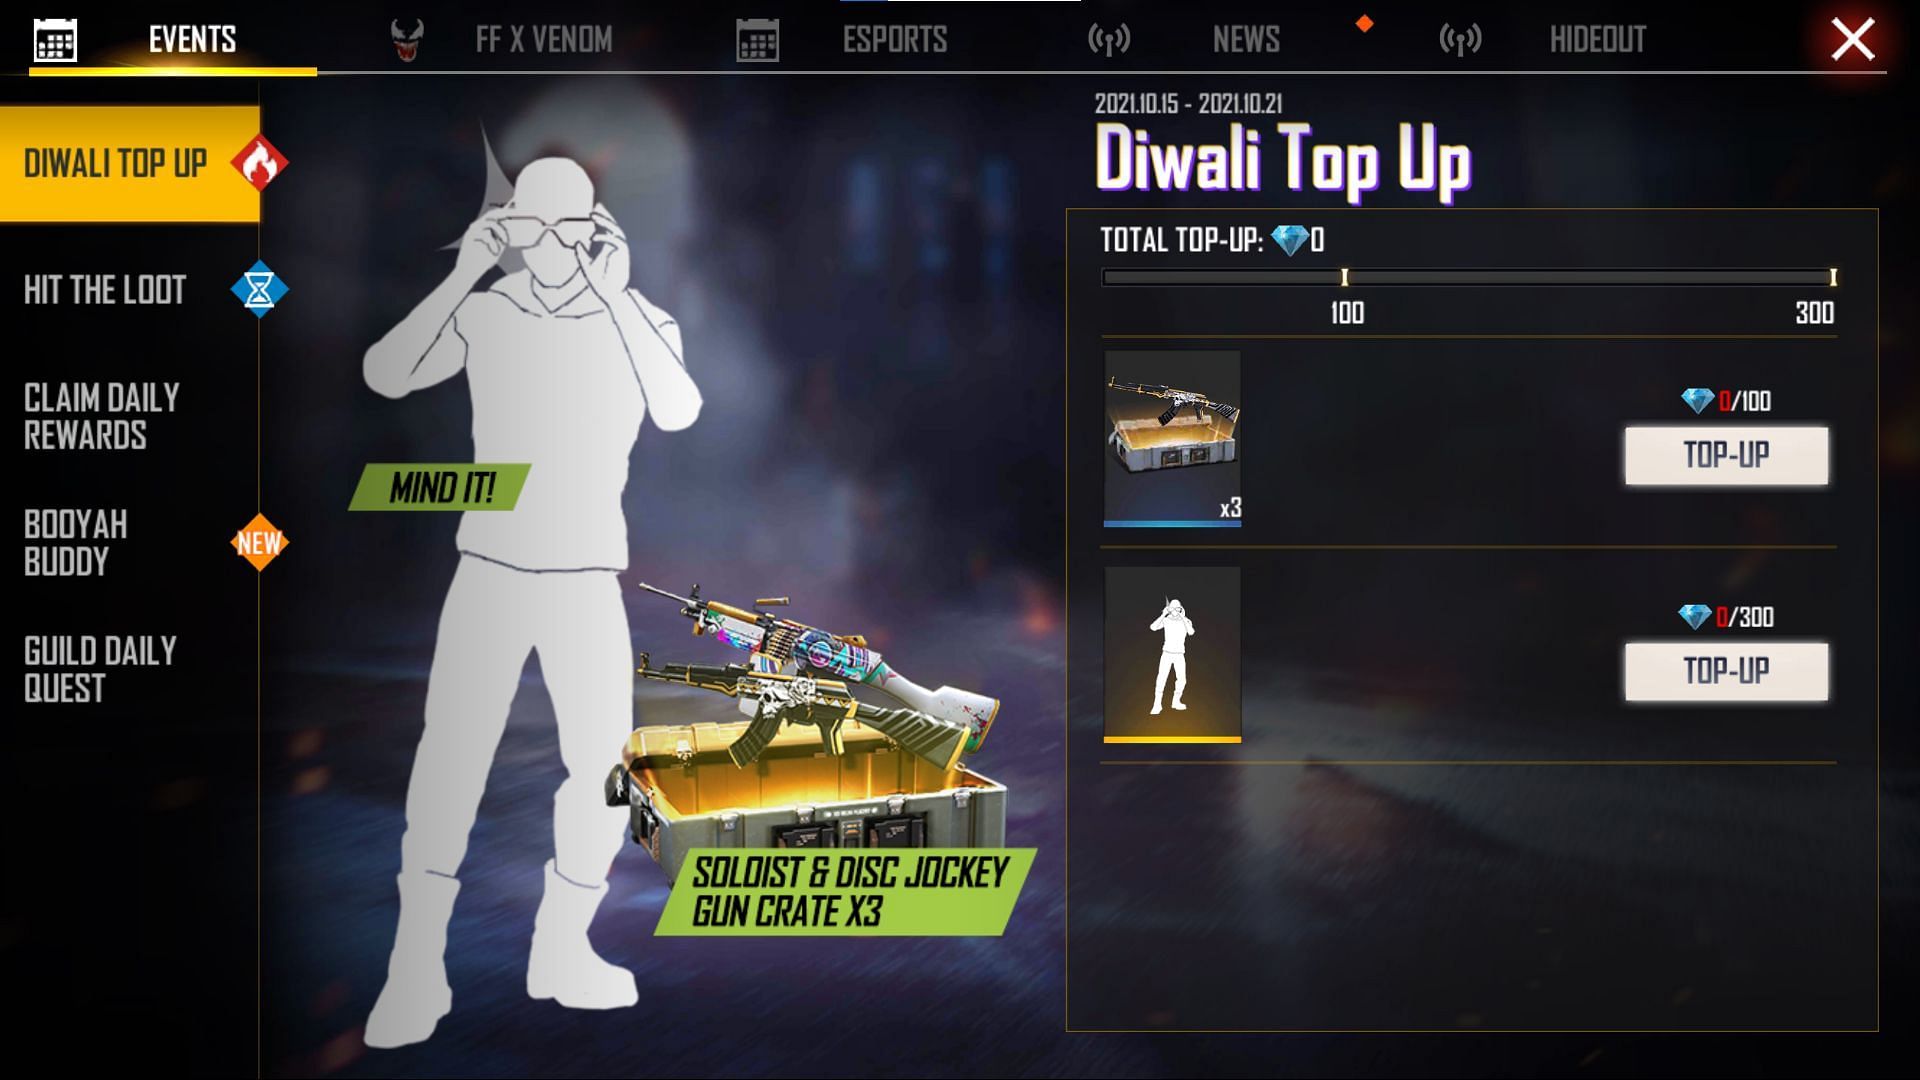 The top up event ends on 21 October in Free Fire (Image via Free Fire)